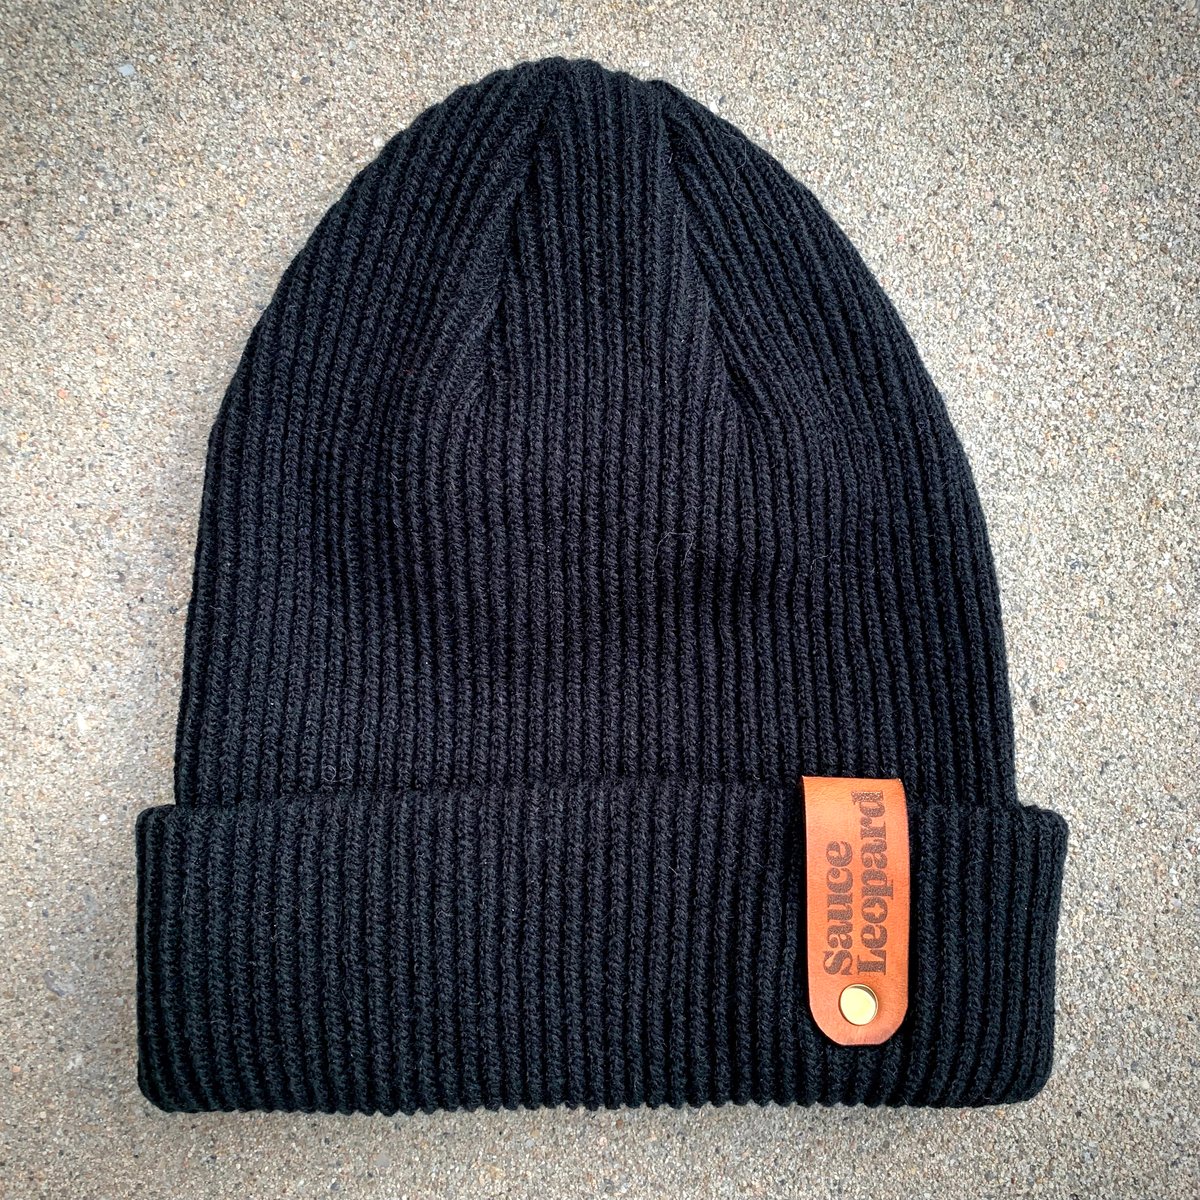 Image of Leather Cuff Black Beanie